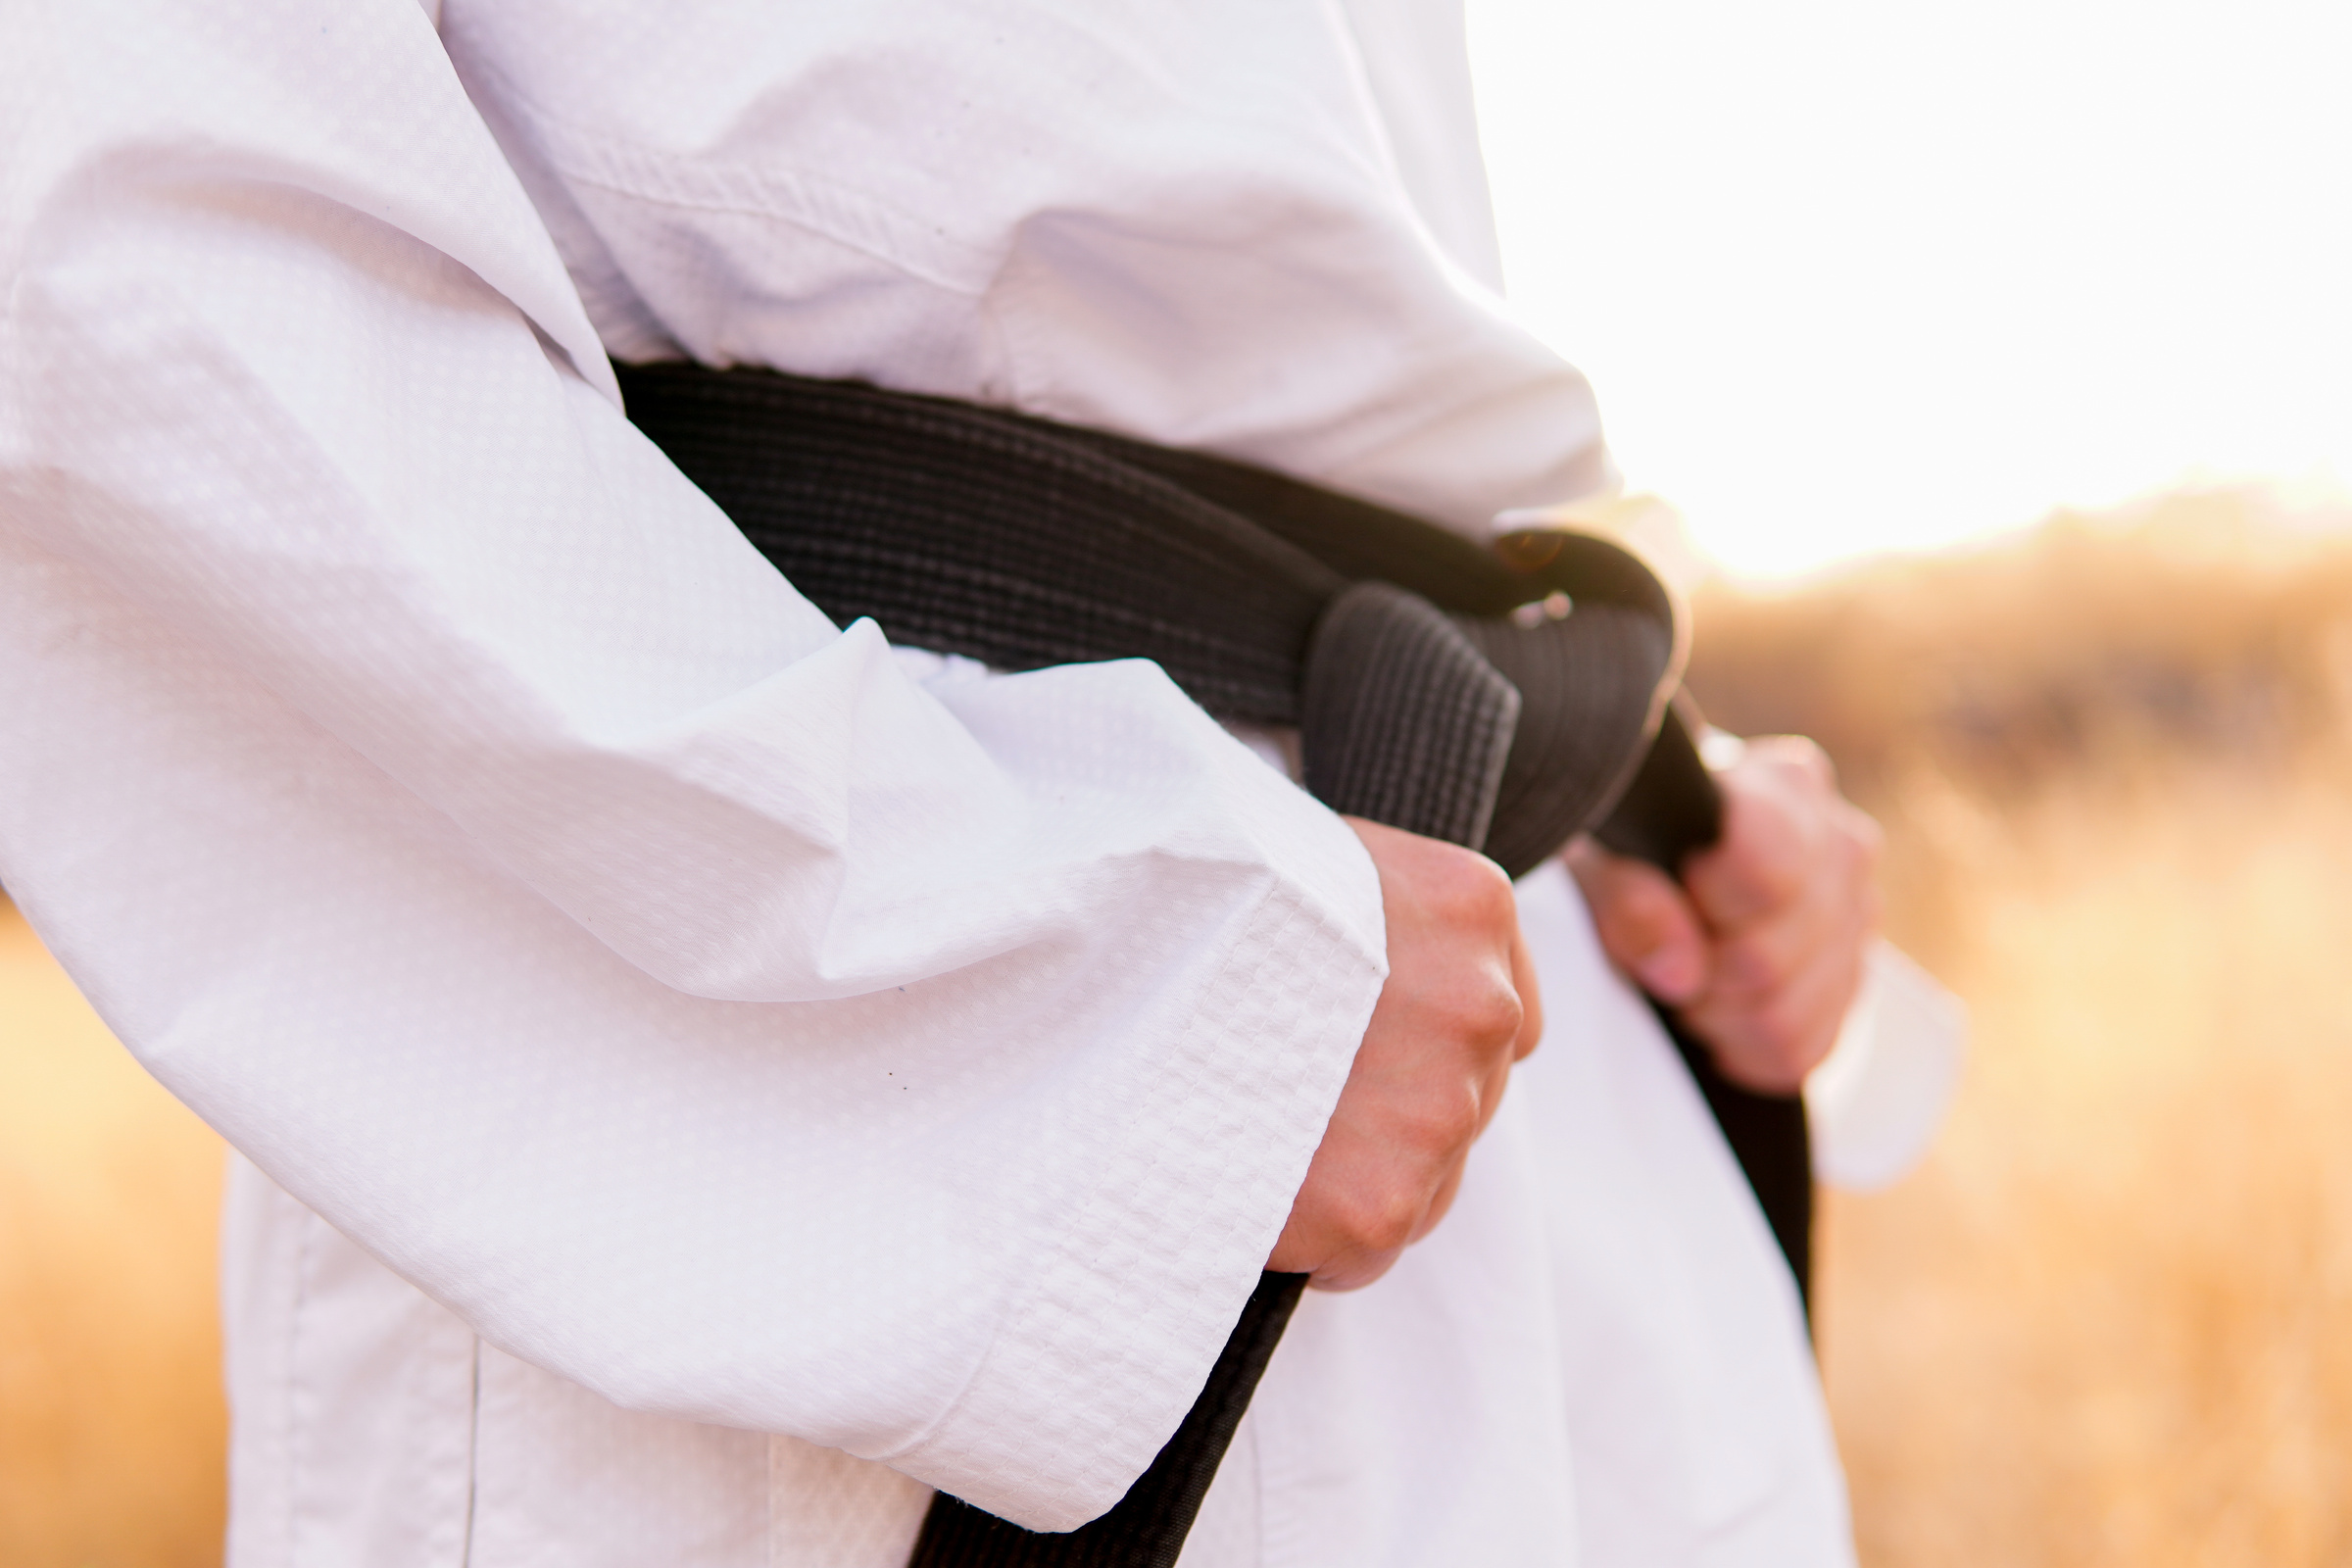 Close-up of a Person with a Taekwondo Black Belt